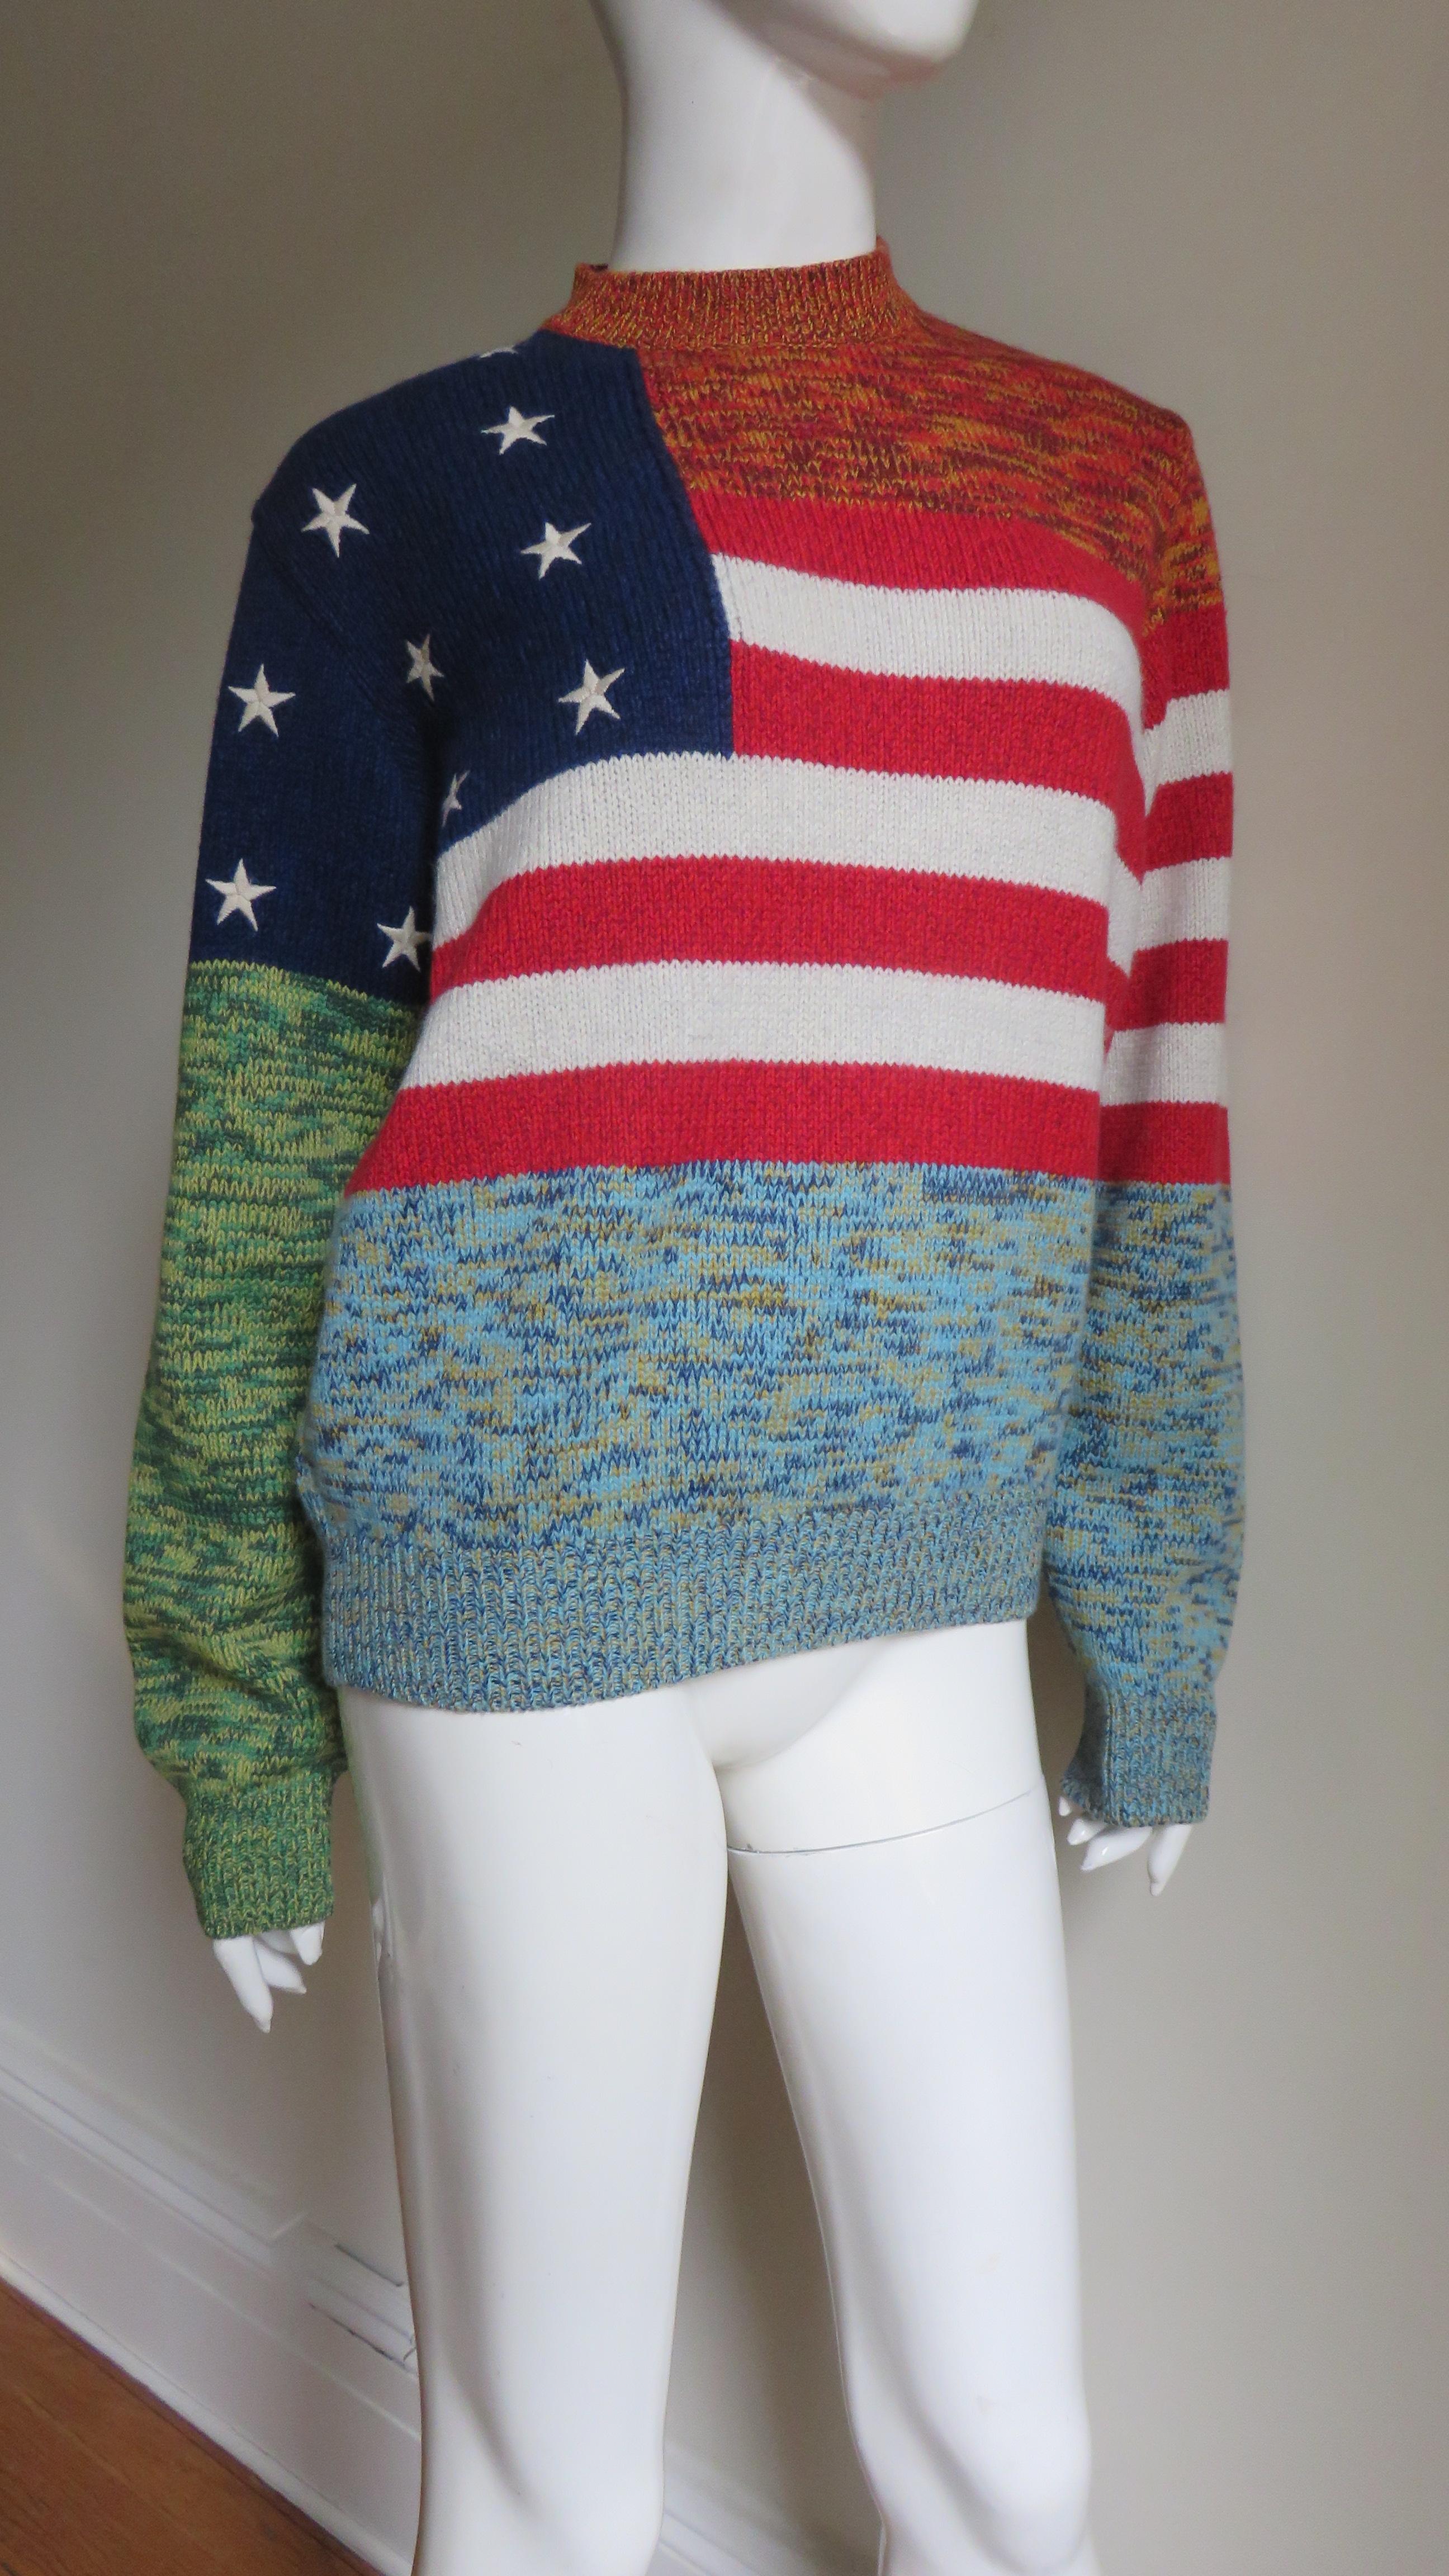 Gianni Versace New Vintage Cashmere Colorblock American Flag Sweater In Excellent Condition For Sale In Water Mill, NY